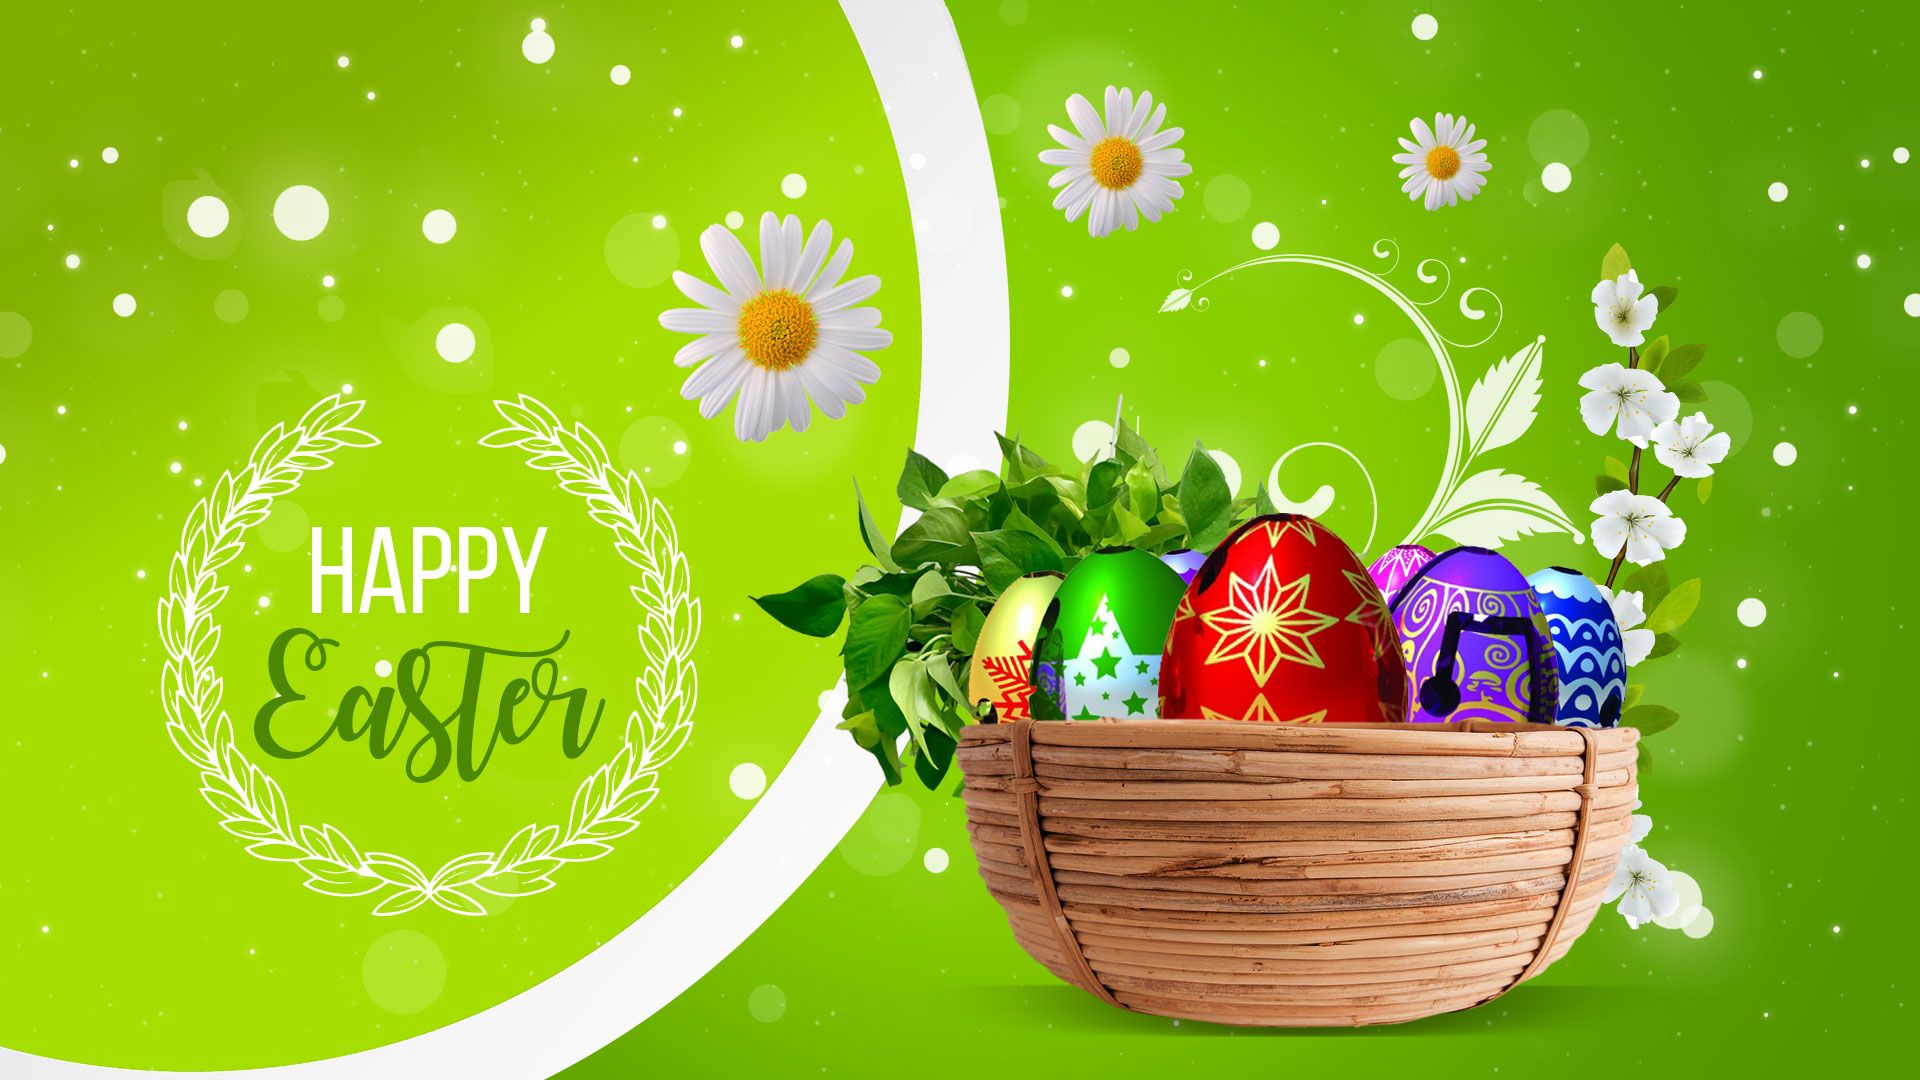 Happy Easter, Easter Greeting Card, Easter HD Image, Easter Egg